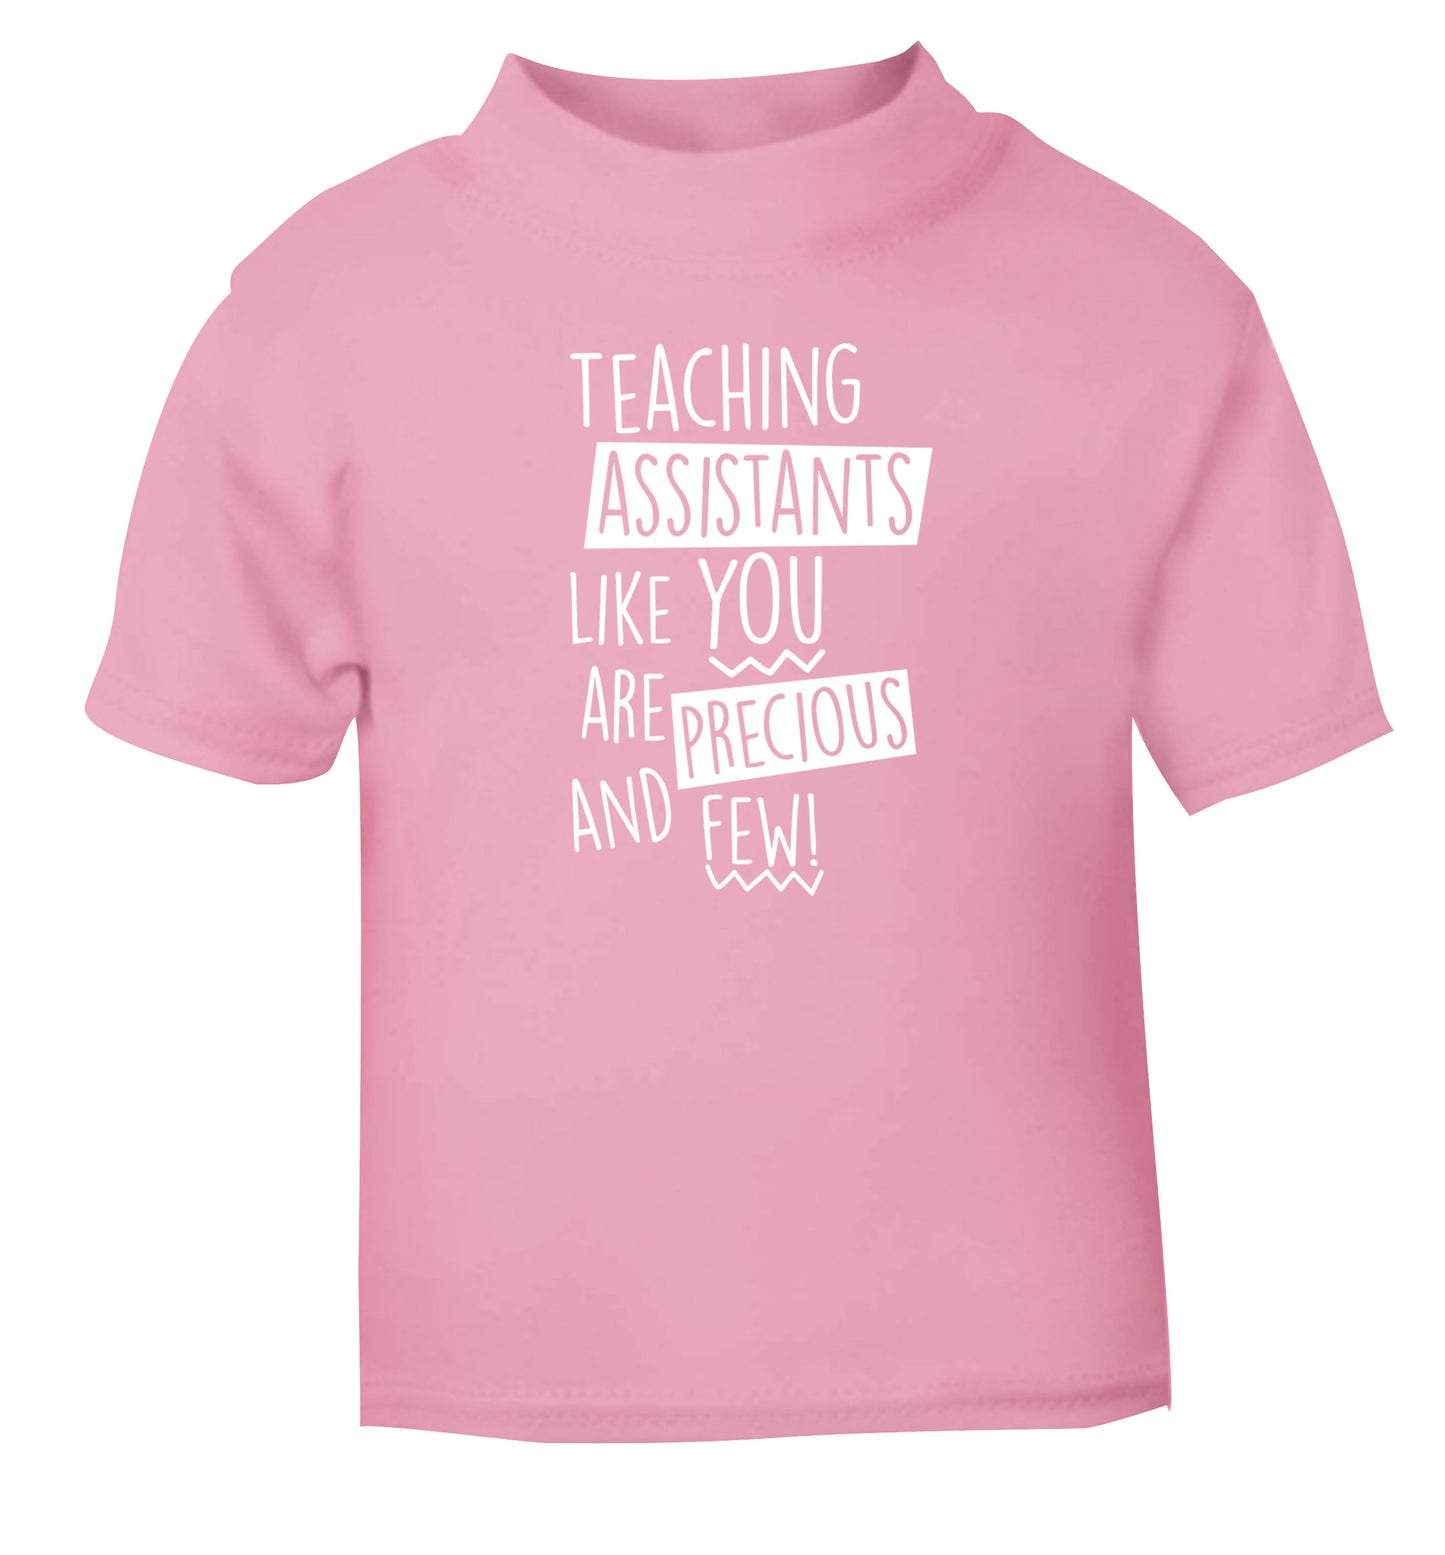 Teaching assistants like you are previous and few! light pink Baby Toddler Tshirt 2 Years